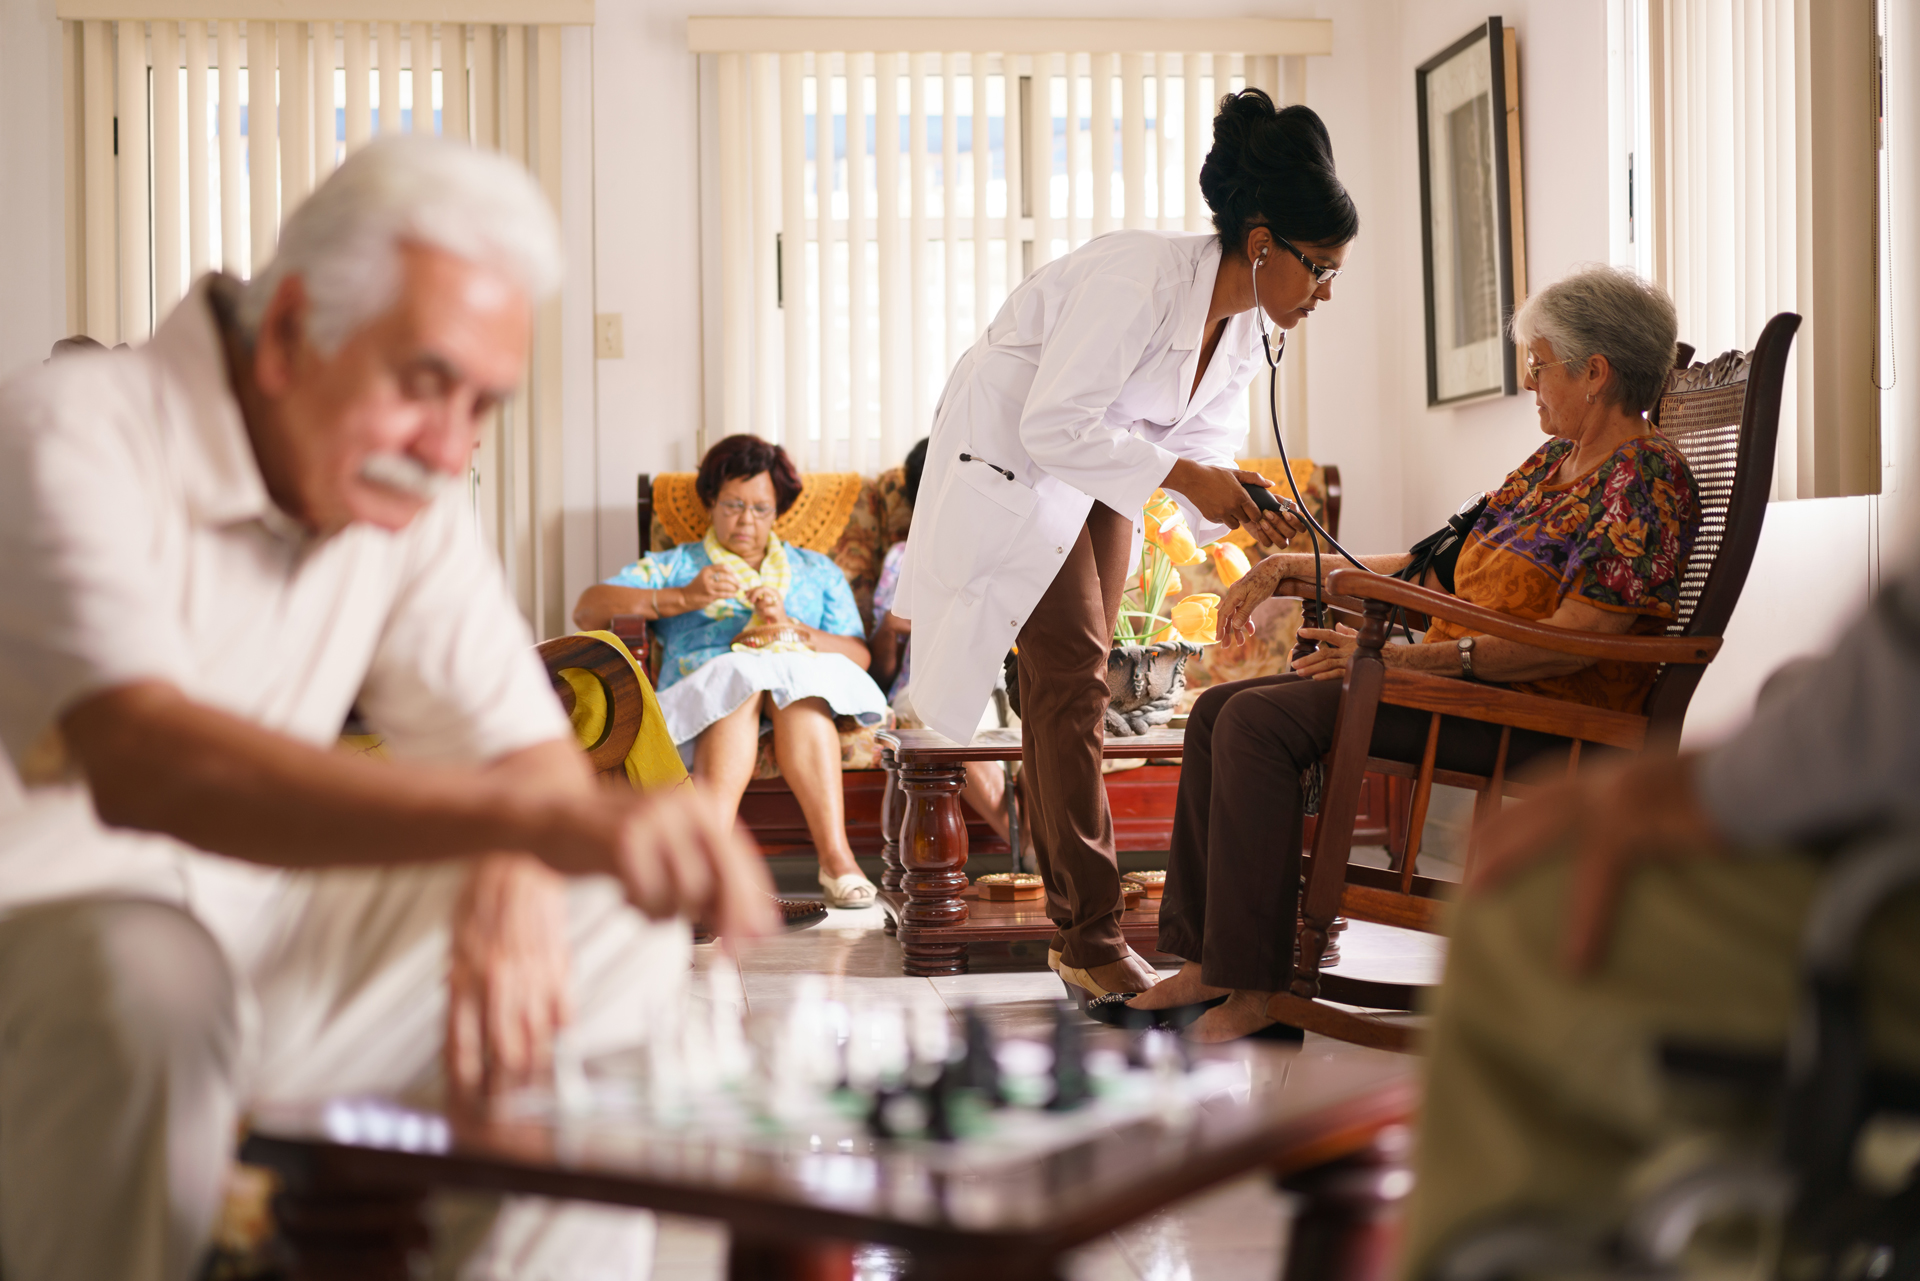 People sitting together within a community gathering in a senior living home.